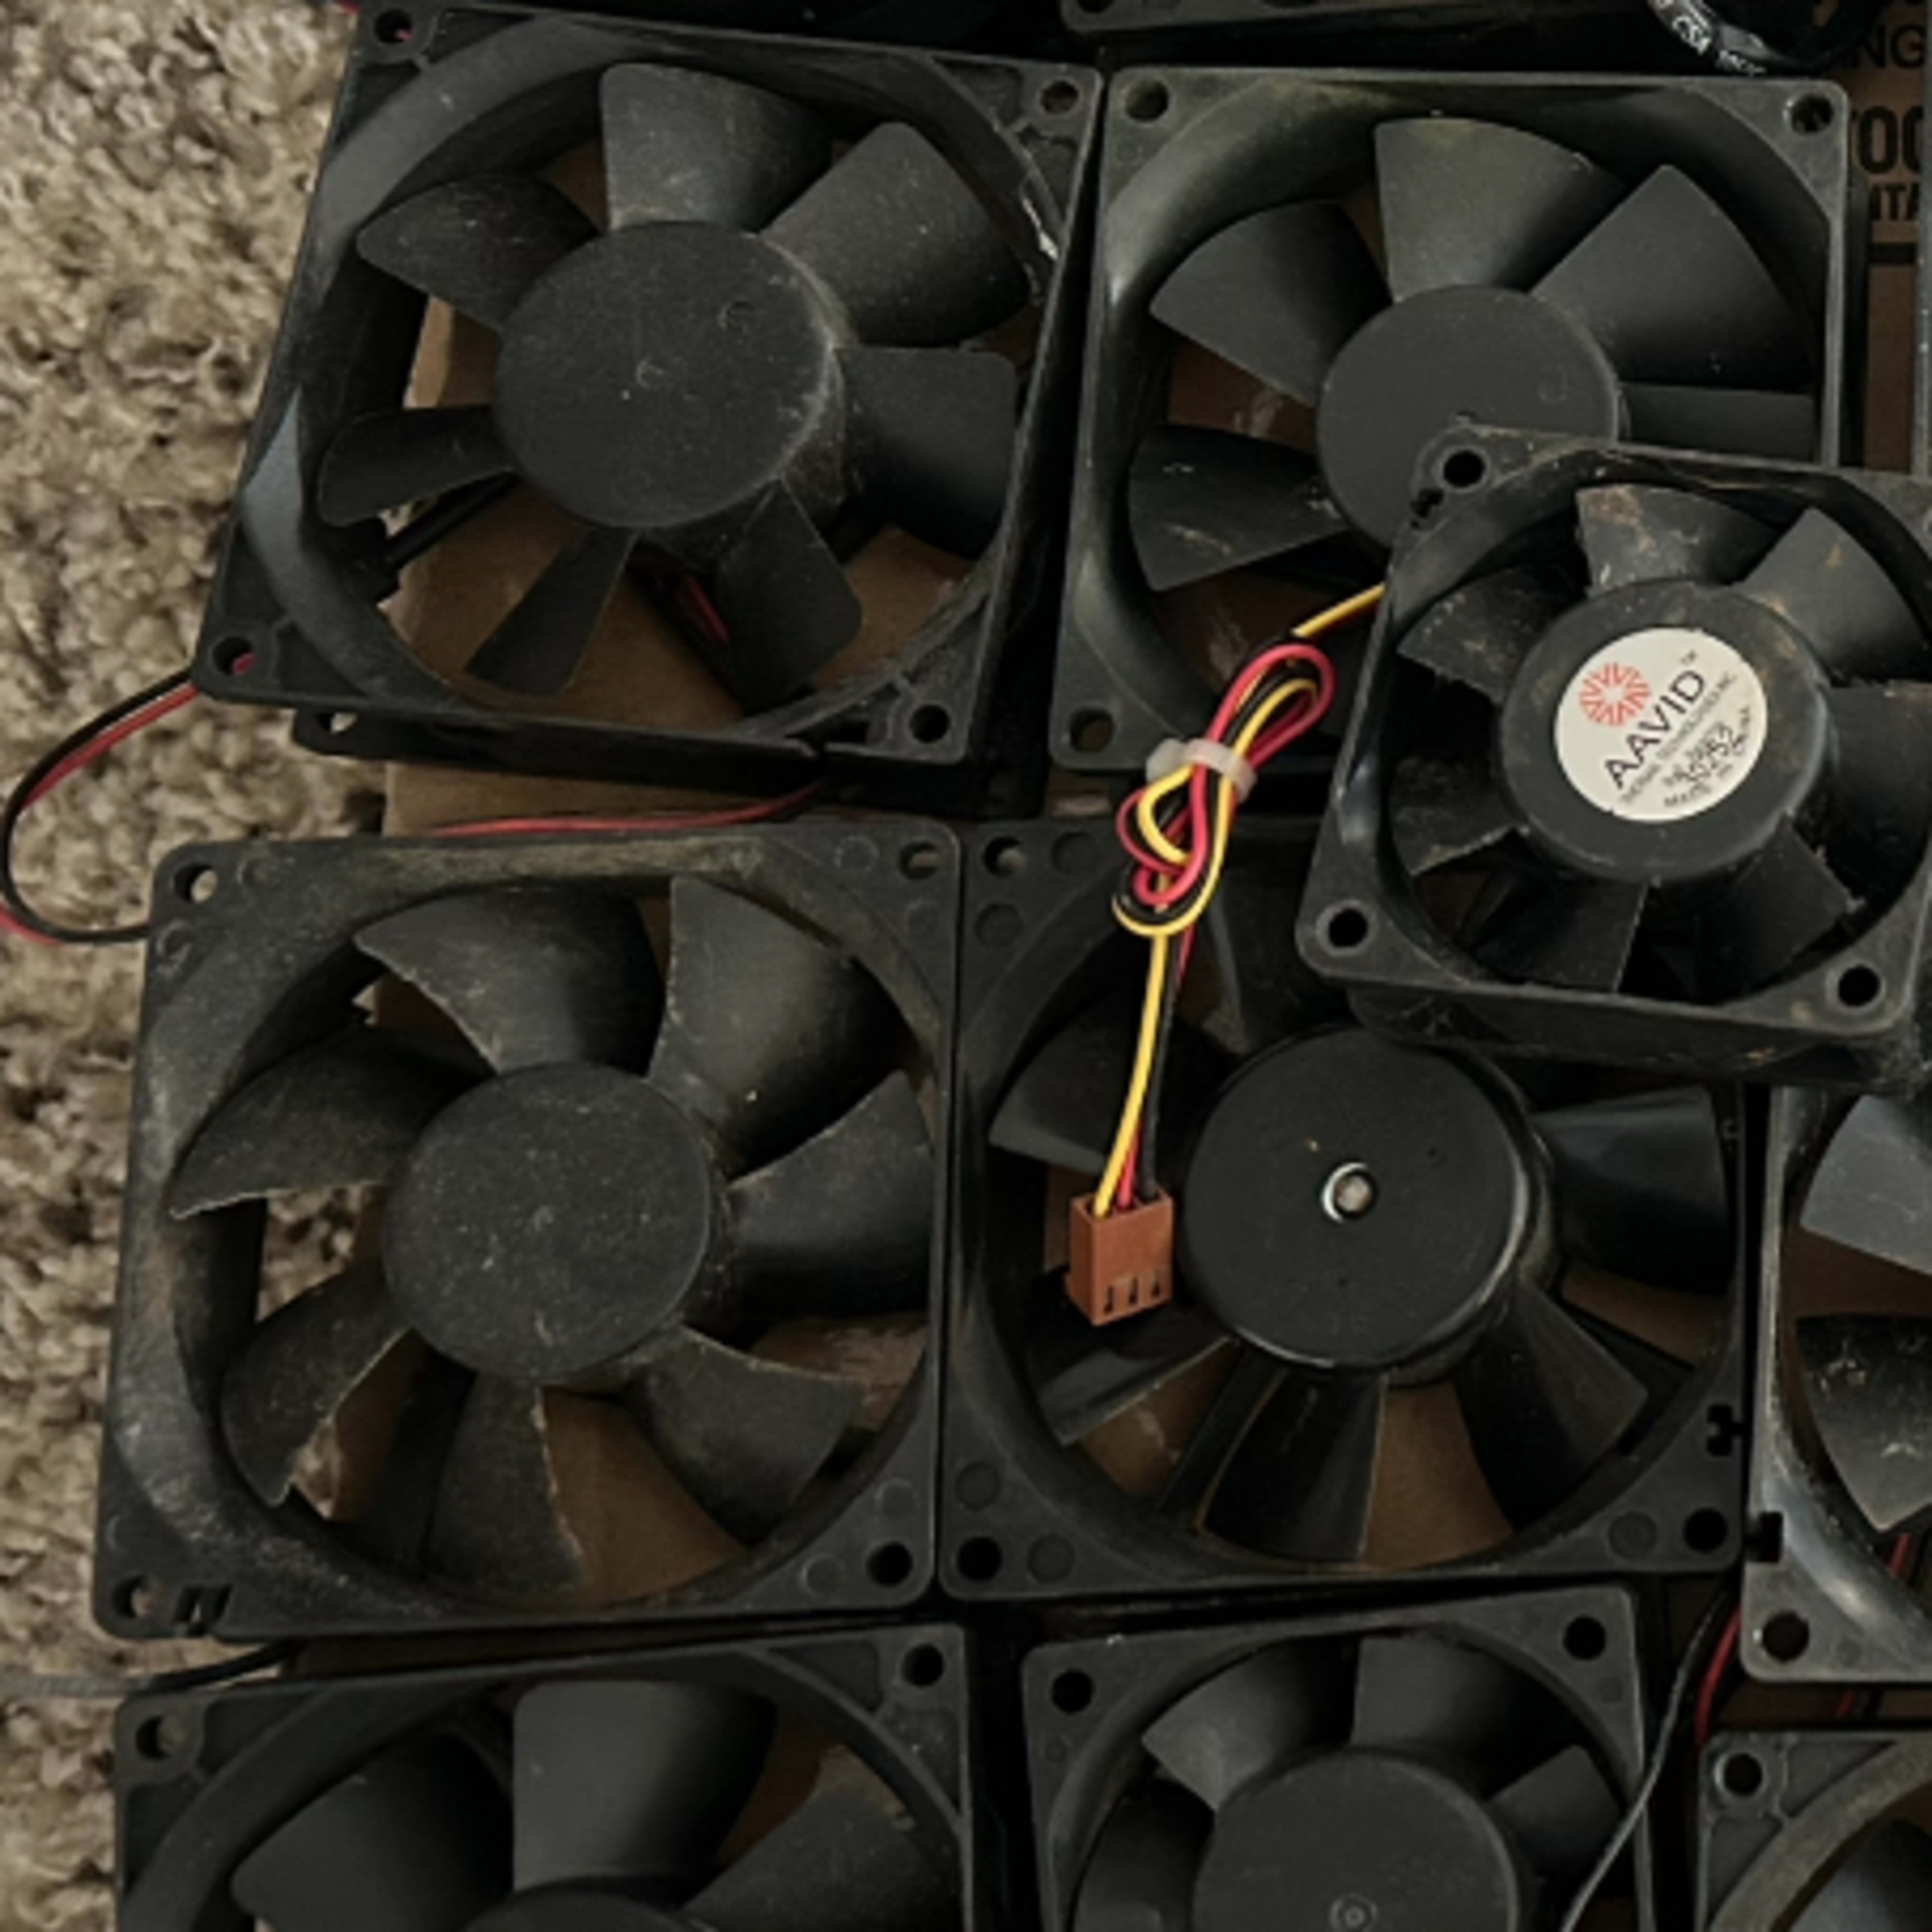 25 Brushless Computer Fans